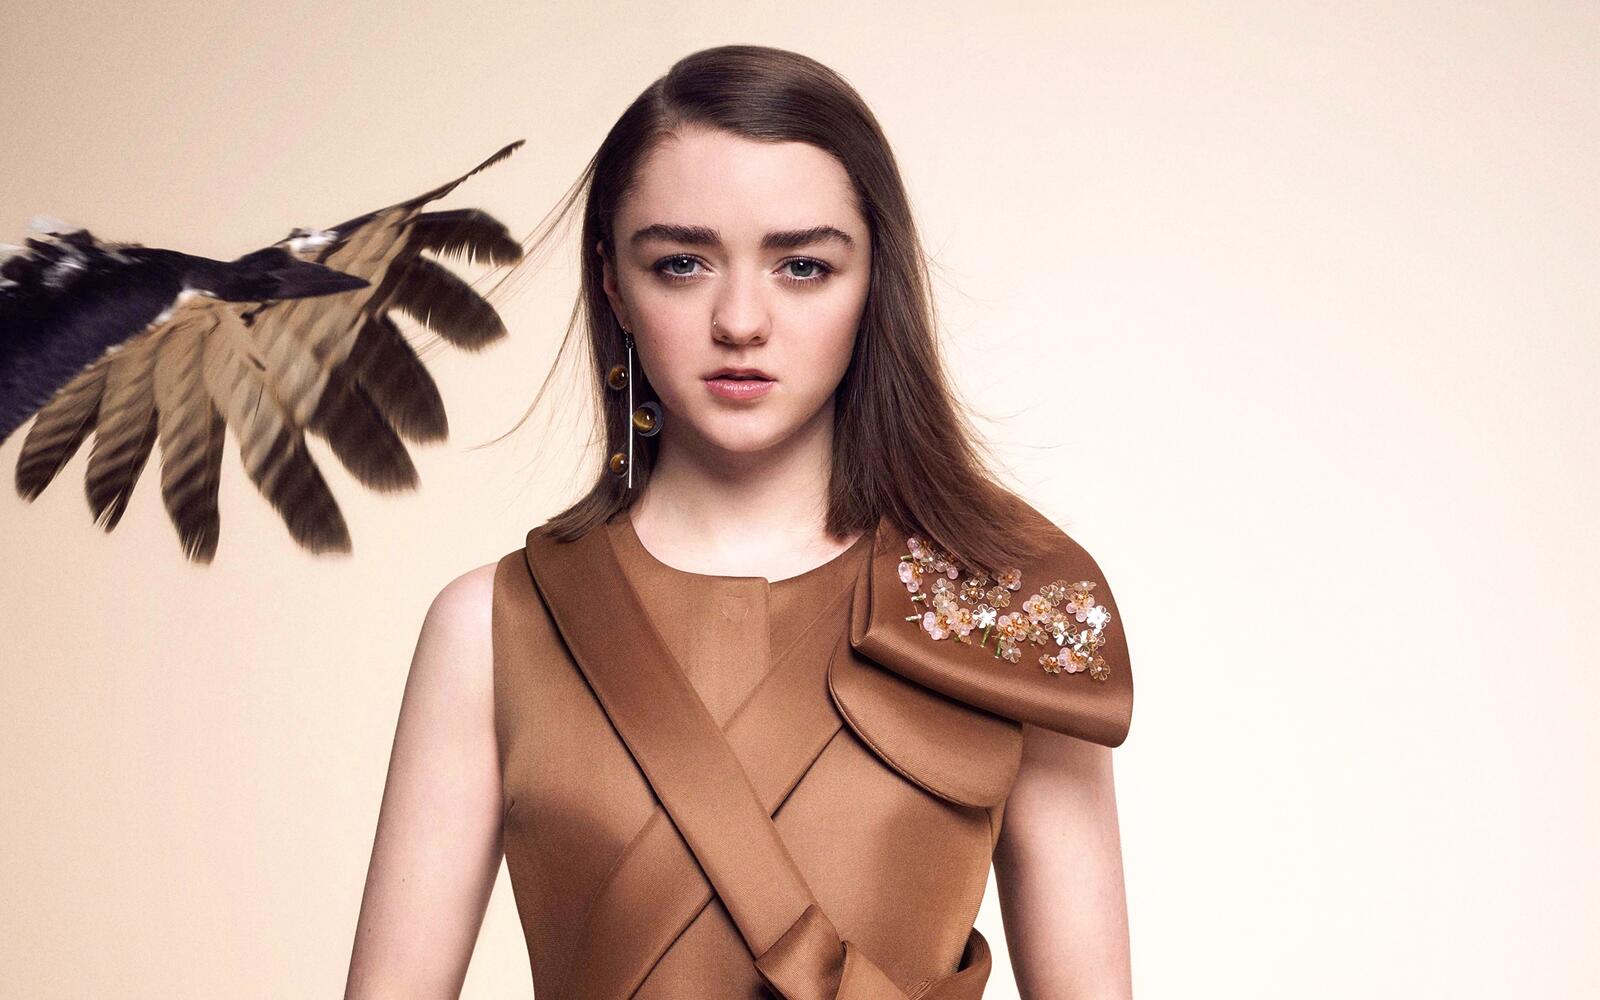 Wallpapers face celebrities maisie williams on the desktop